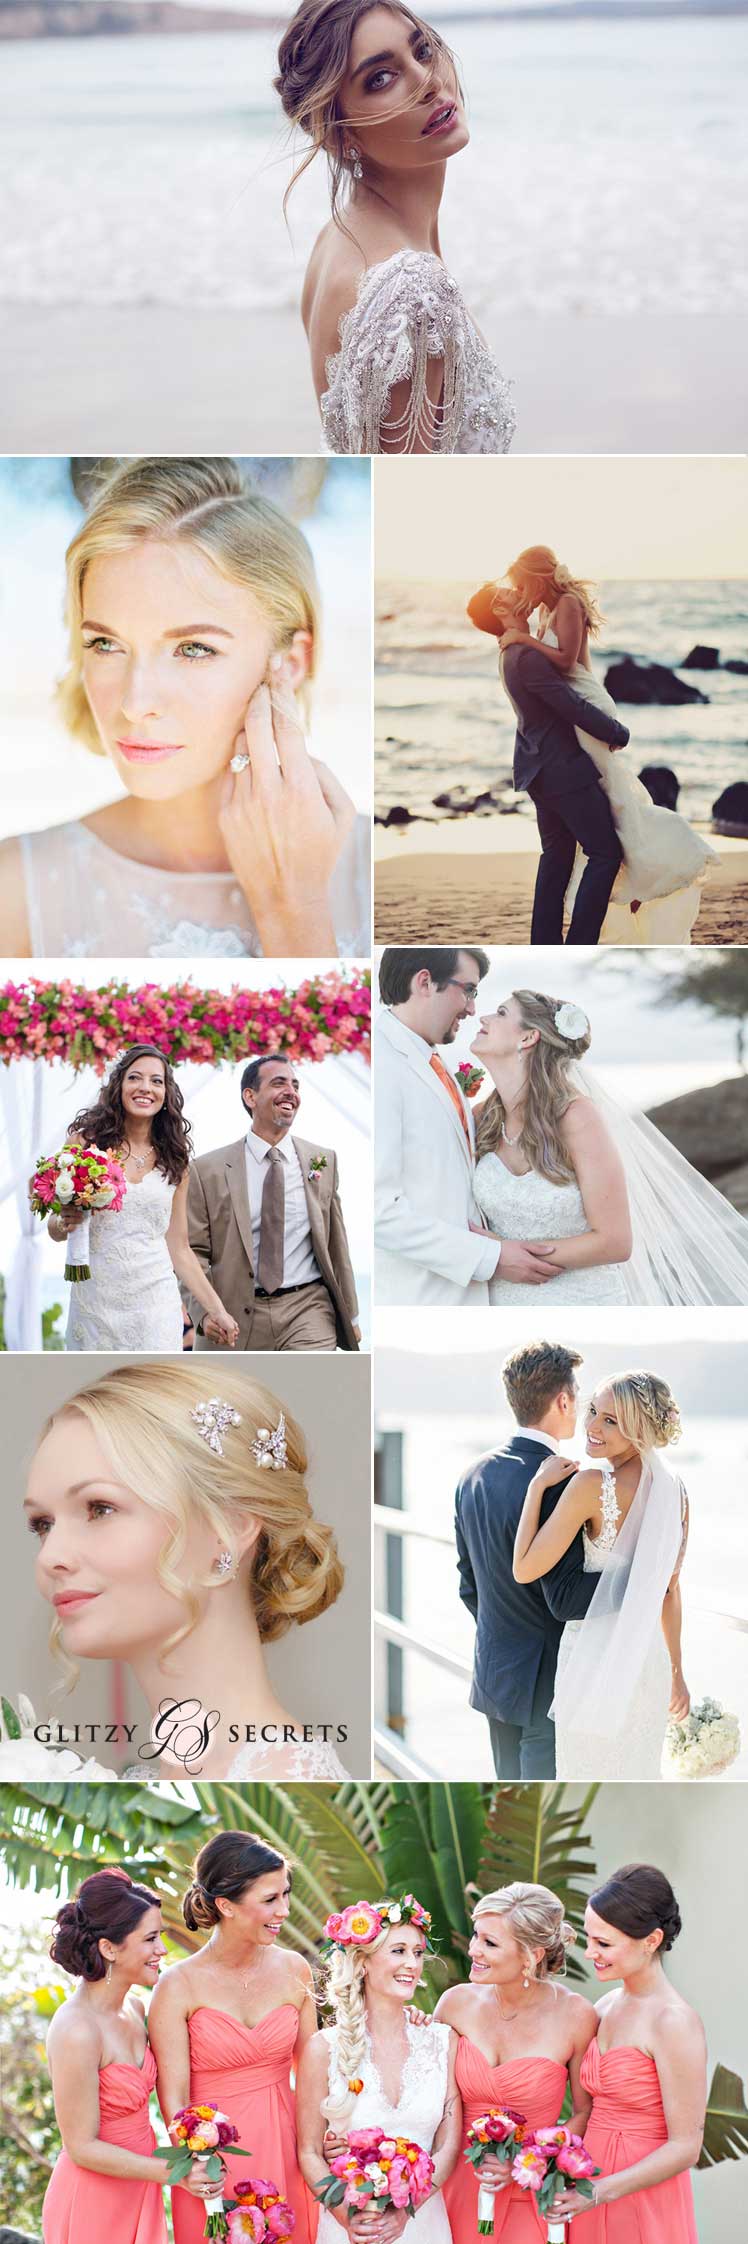 Hair and make-up ideas for a destination wedding